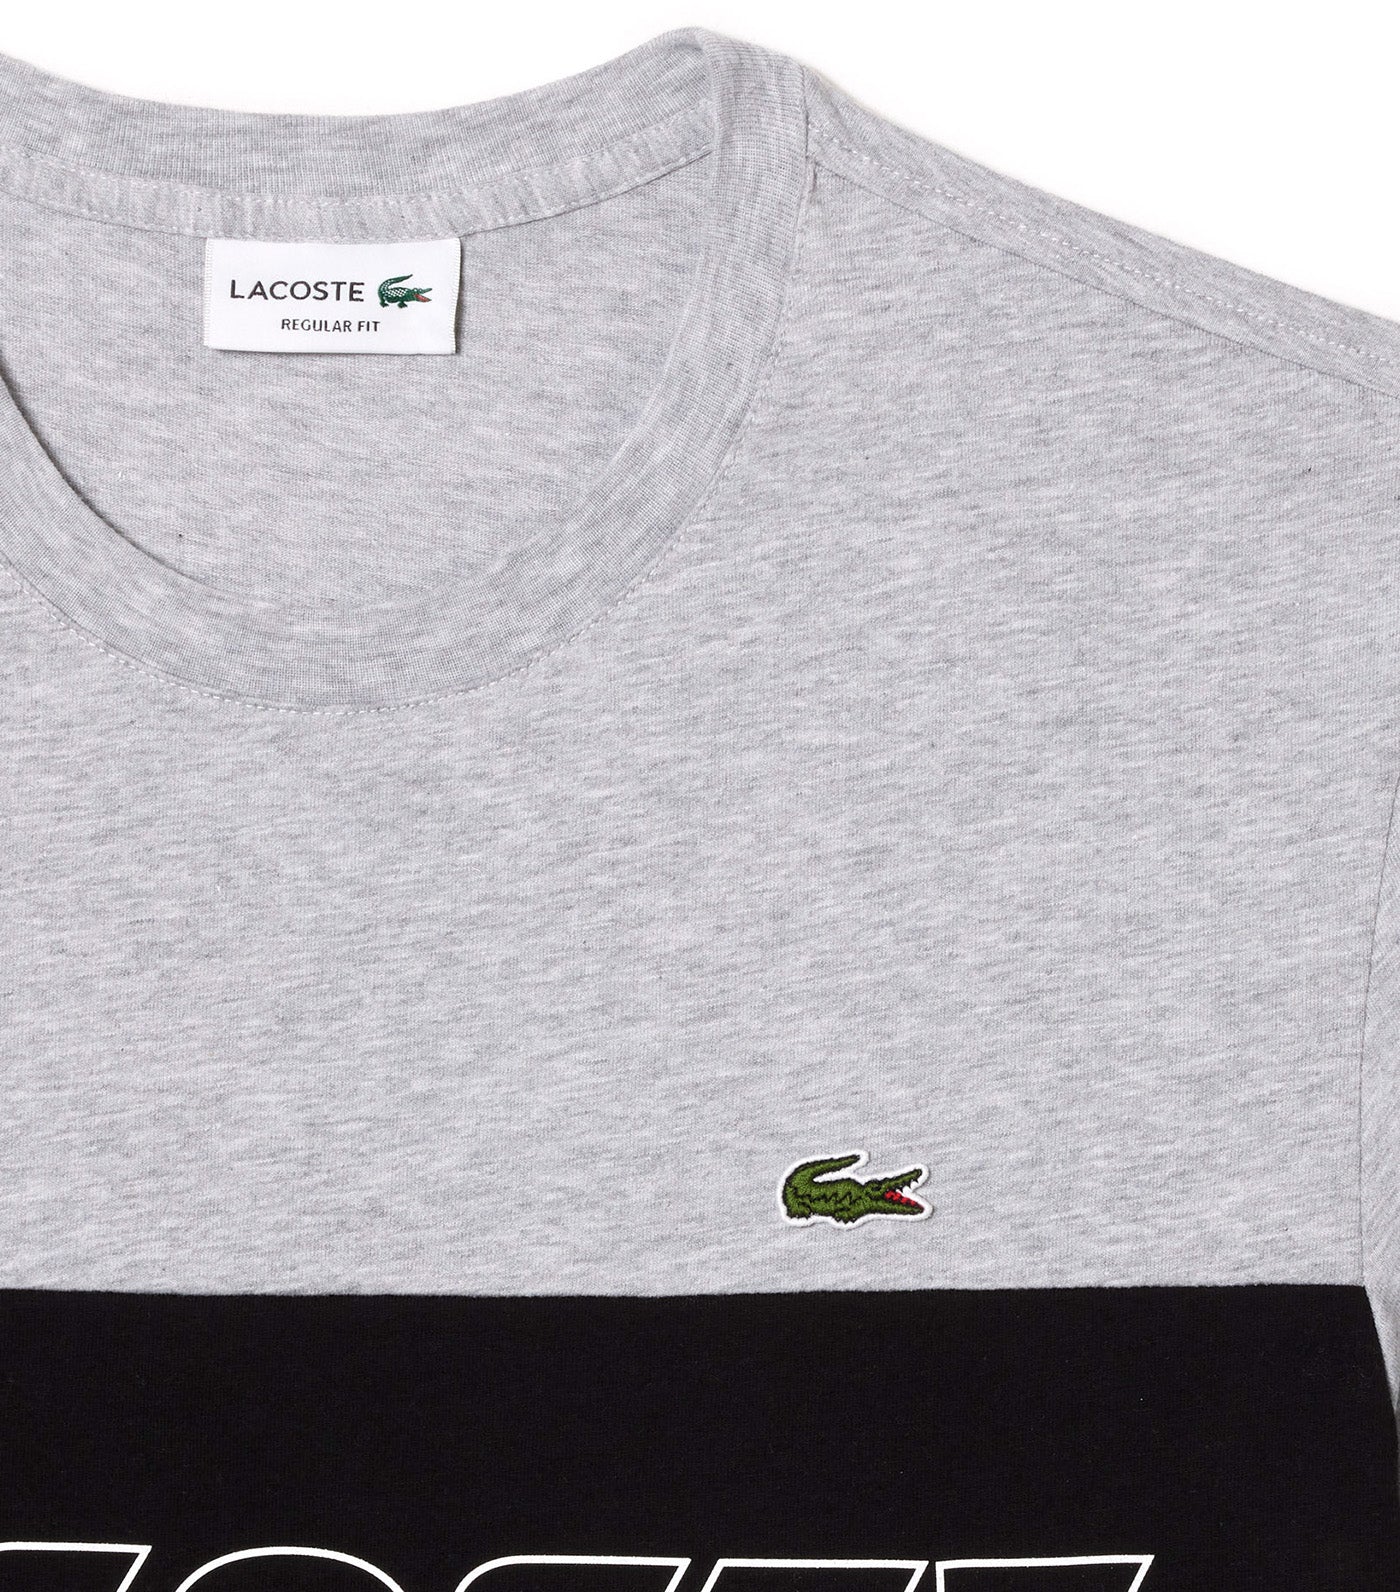 Lacoste Regular Fit Printed Colourblock T-Shirt Silver Chine/Black